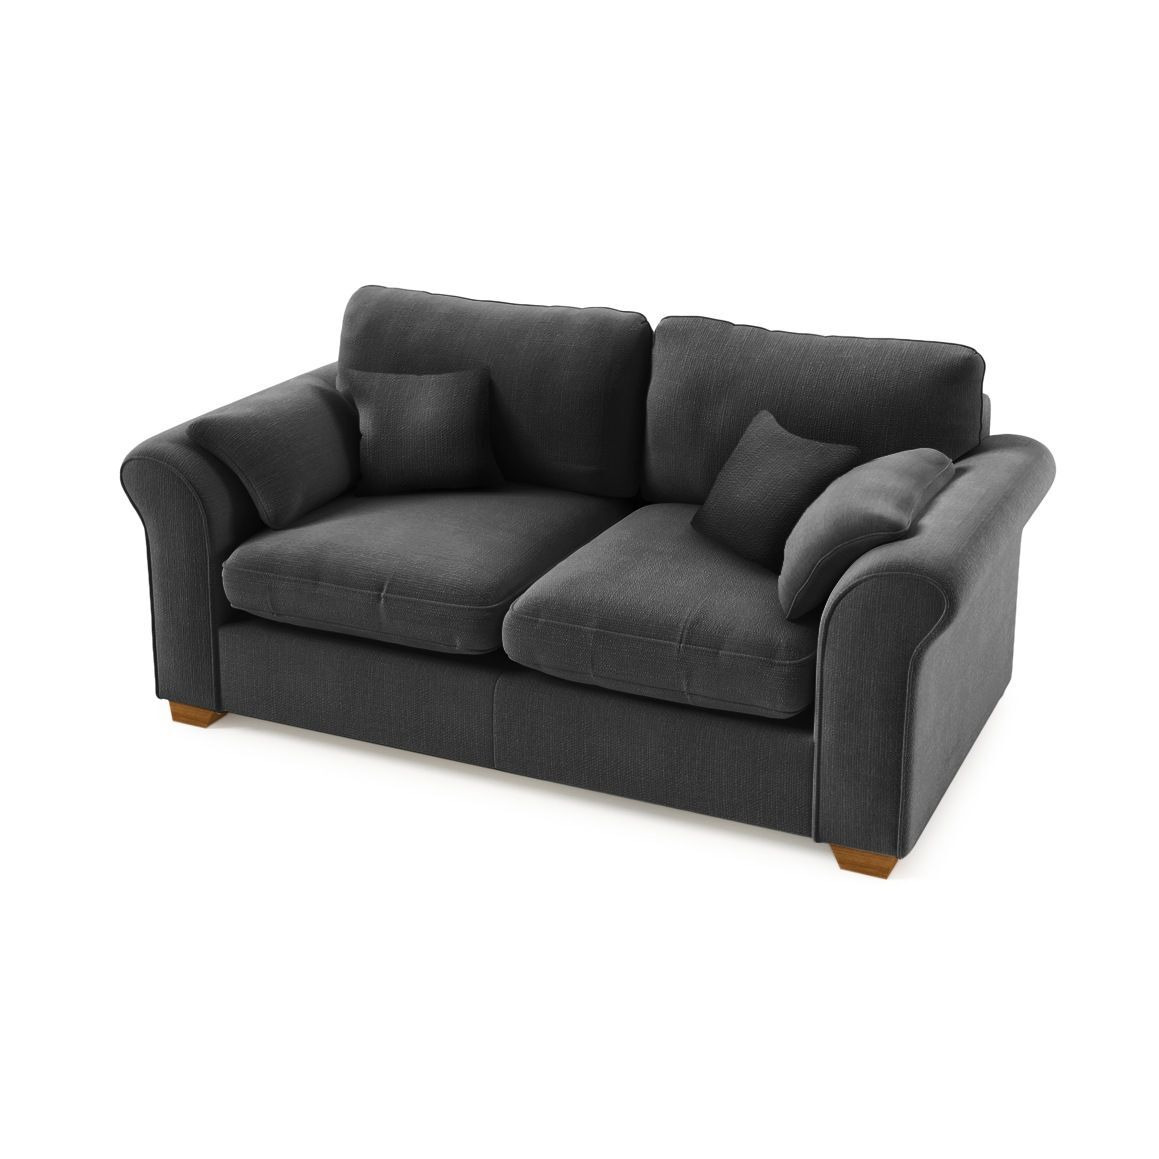 Icon 2 Seater Sofa Bed, blue - image 1